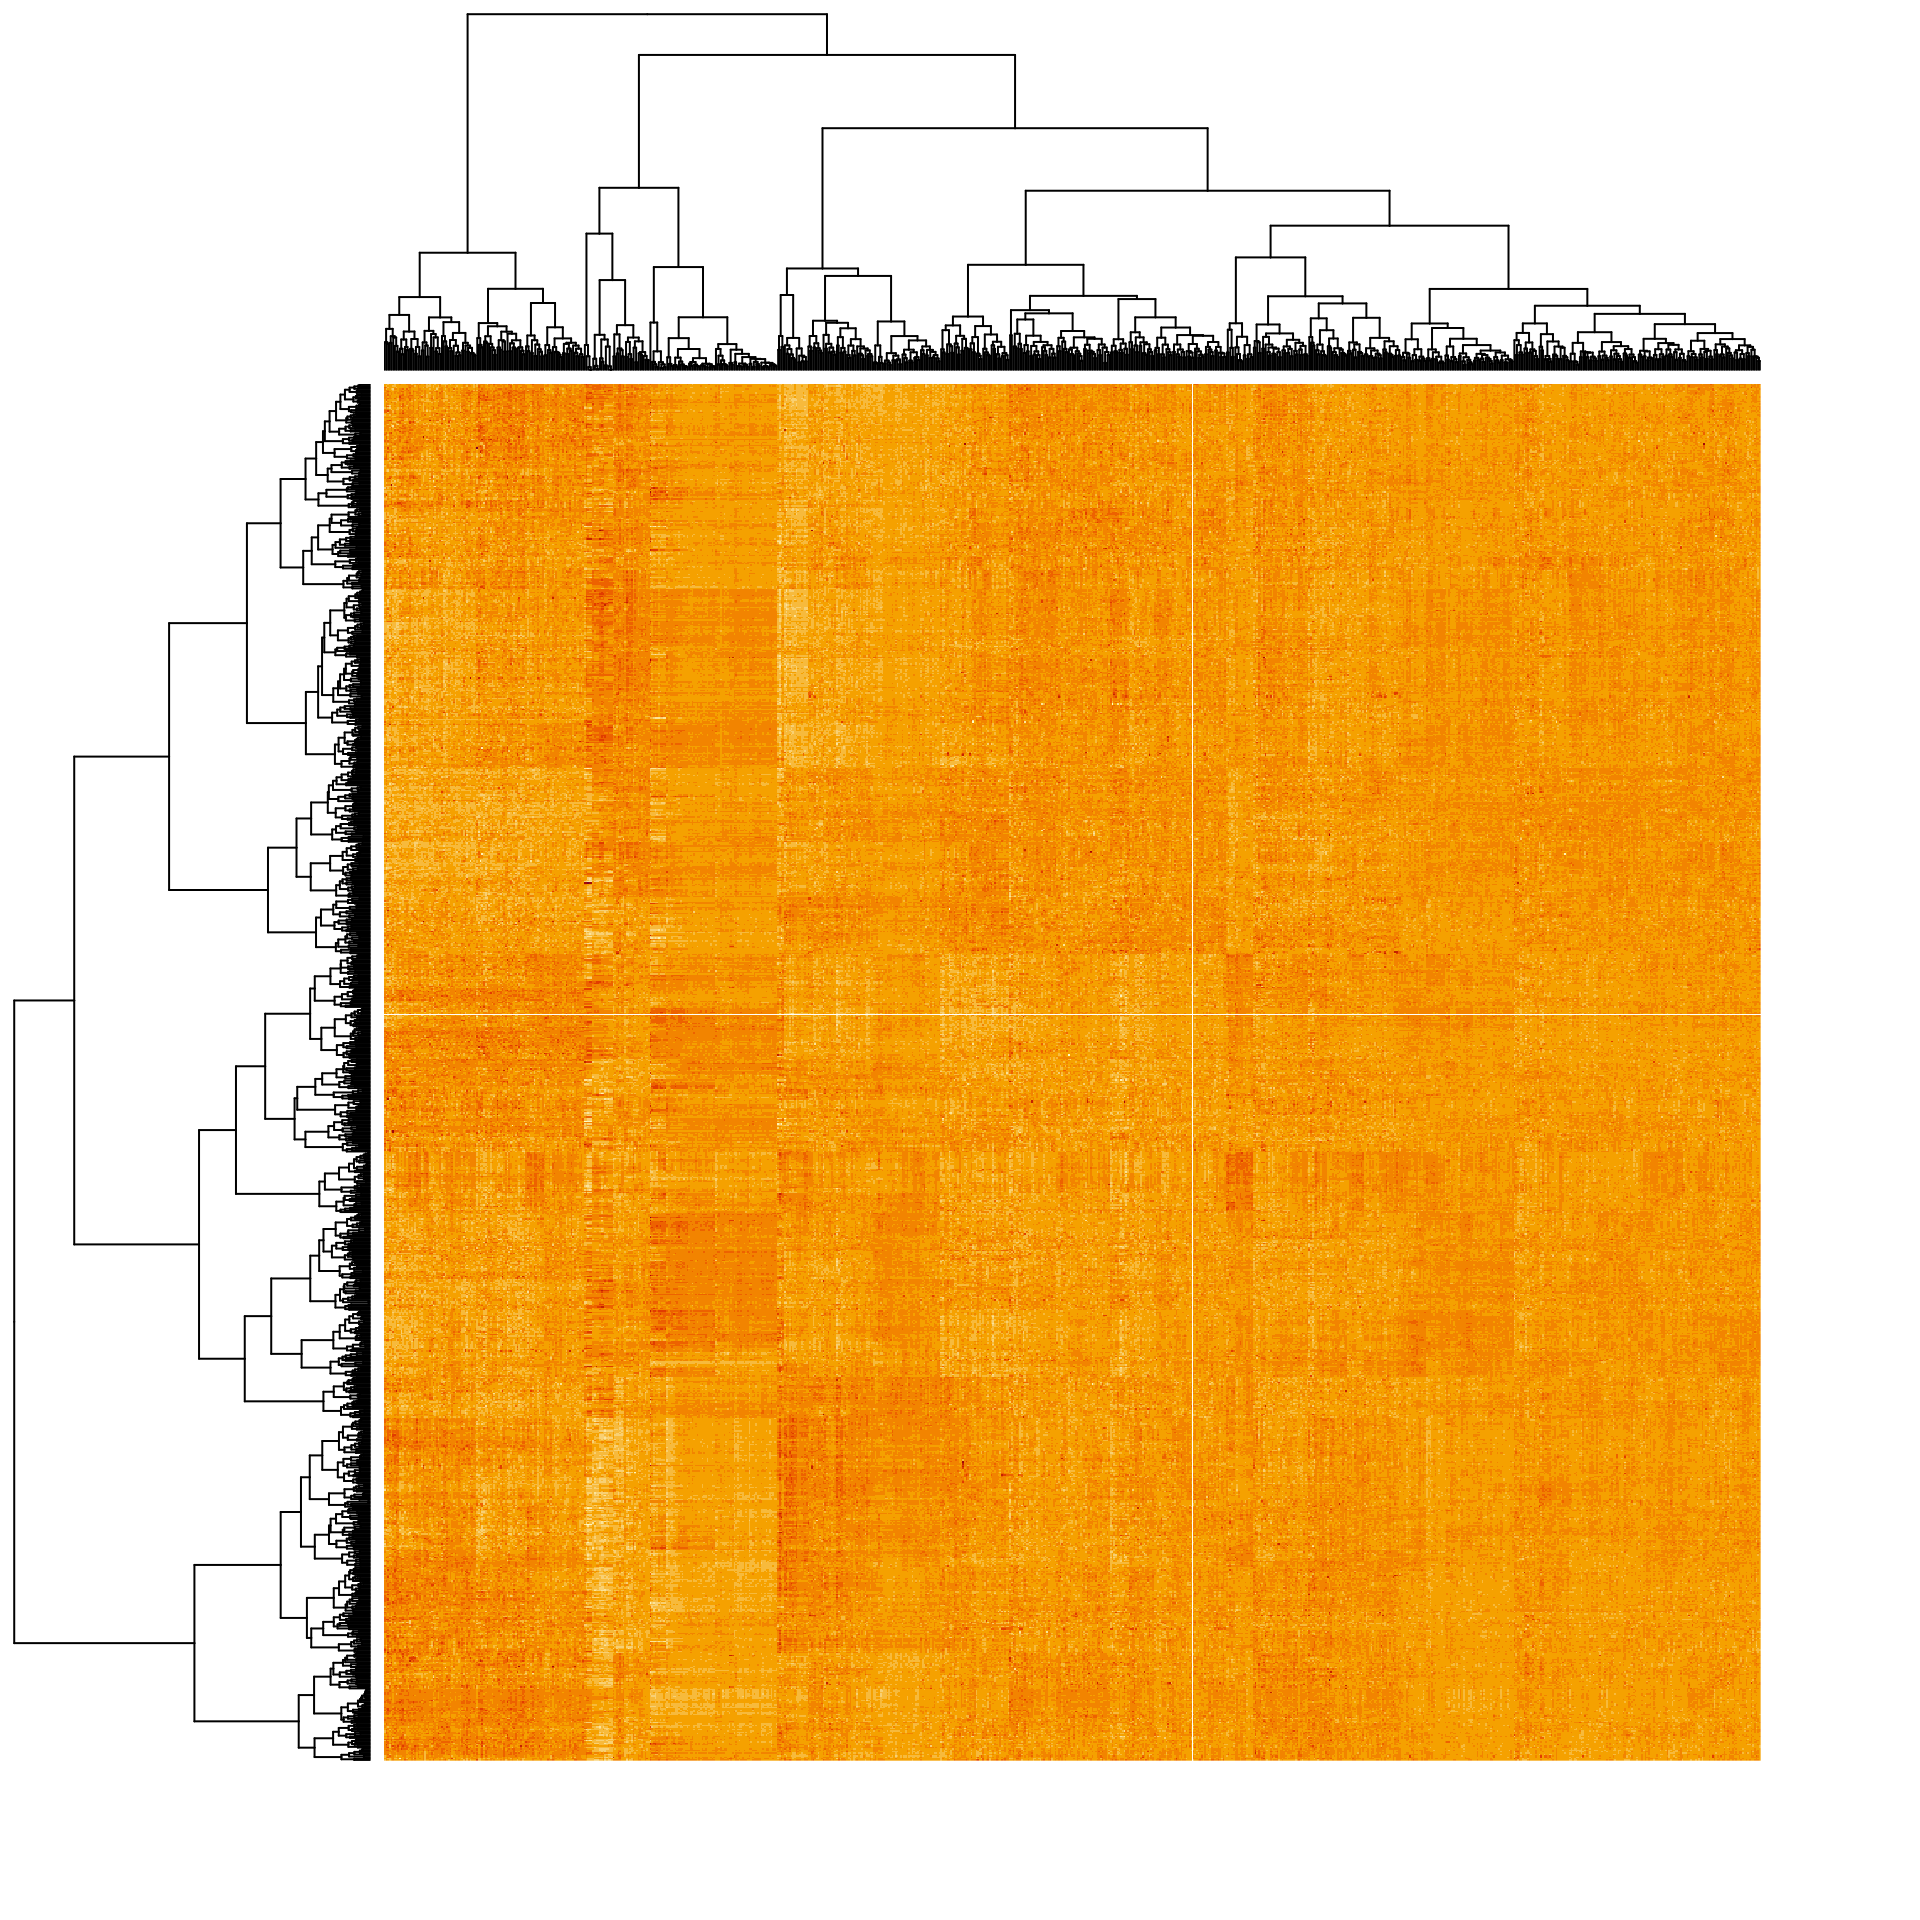 Heat map of the expression matrix clustered by genes (rows) and samples (columns).